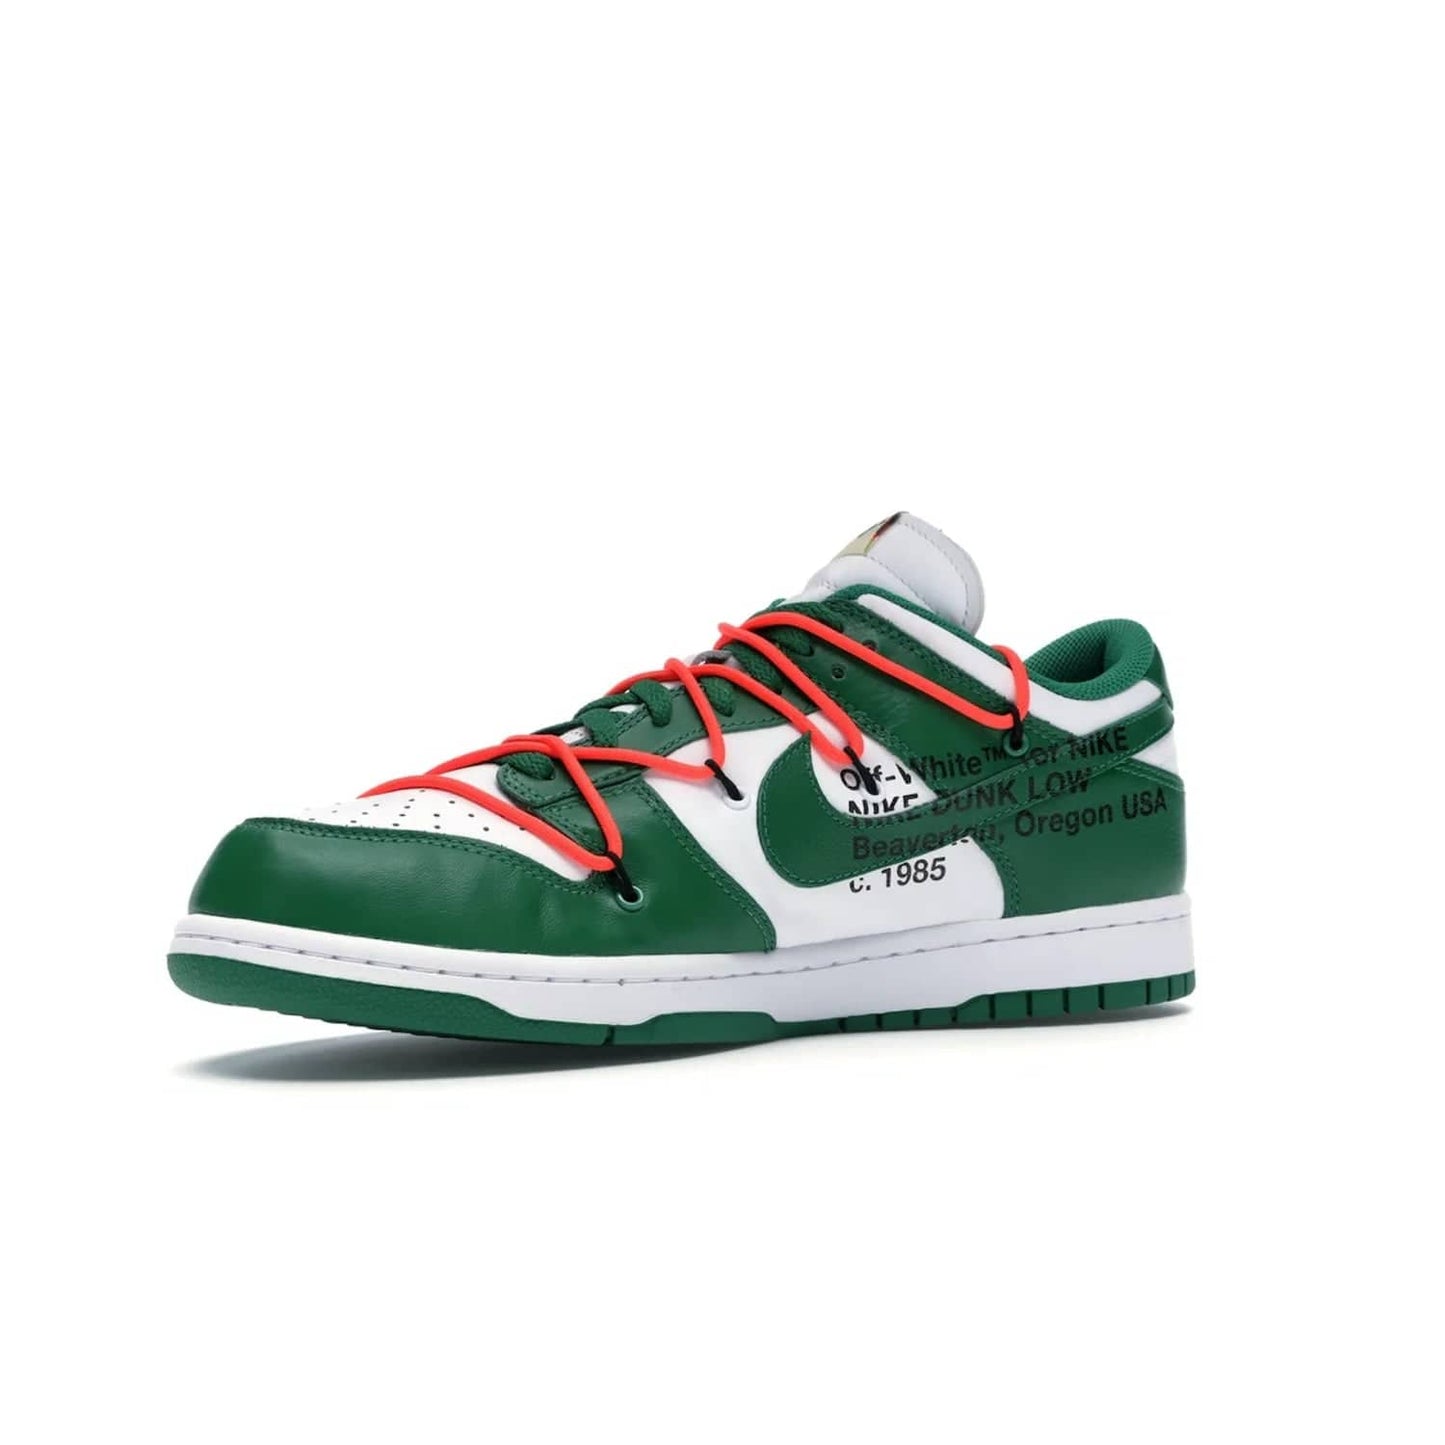 Nike Dunk Low Off-White Pine Green - Image 16 - Only at www.BallersClubKickz.com - The Nike Dunk Low Off-White Pine Green combines classic 1980s style with modern-day design. Featuring white leather uppers and pine green overlays, these classic kicks feature secondary lacing system, zip-ties and signature Off-White text. Releasing in December 2019, these shoes are a timeless classic for any wardrobe.